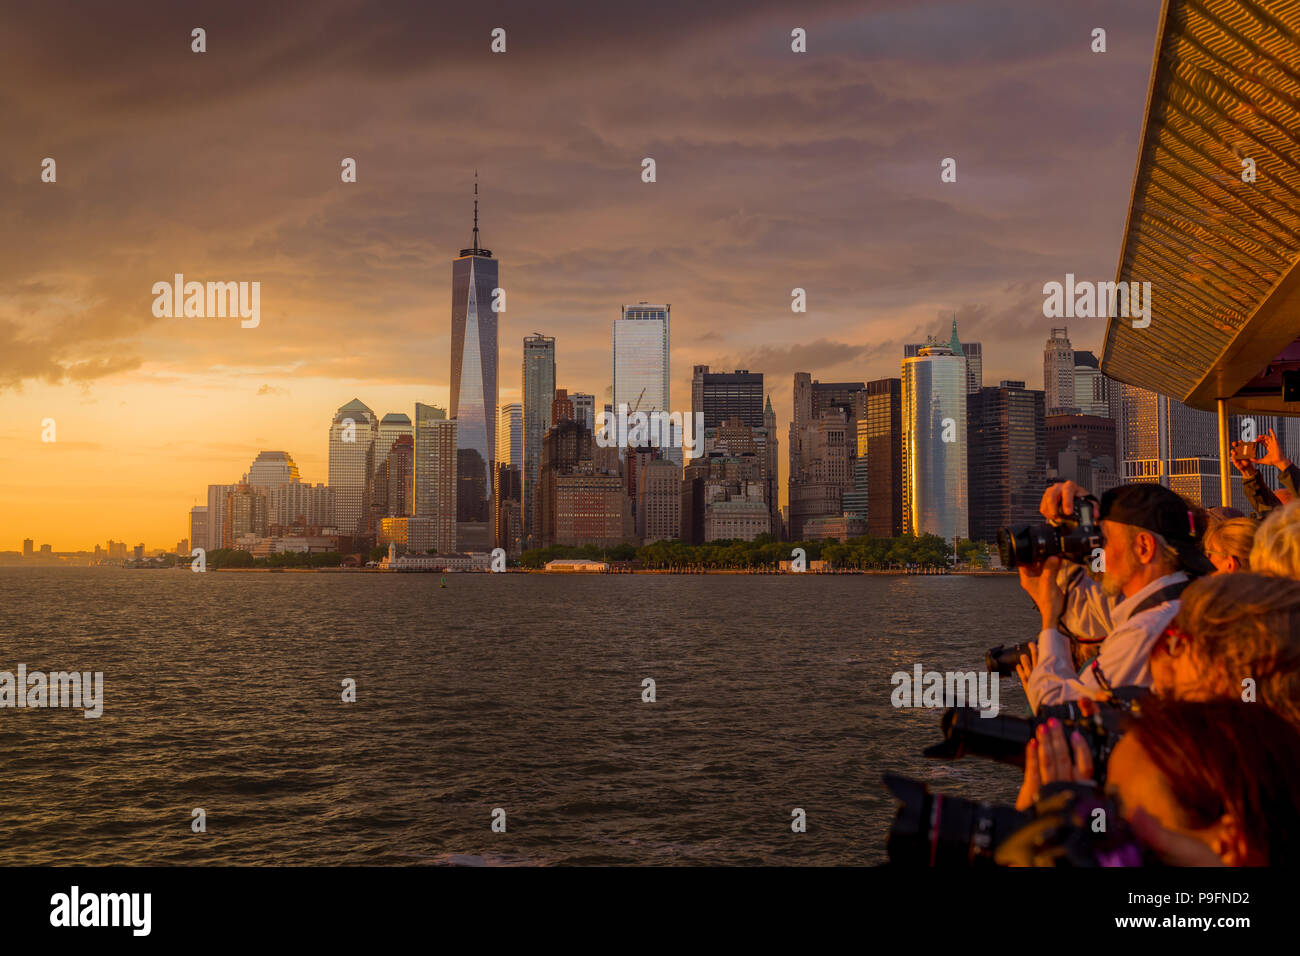 New York, NY USA - JUNE 4, 2018. Photographers taking spectacular sunset photos from cruise ship with lower Manhattan in backgournd. Stock Photo